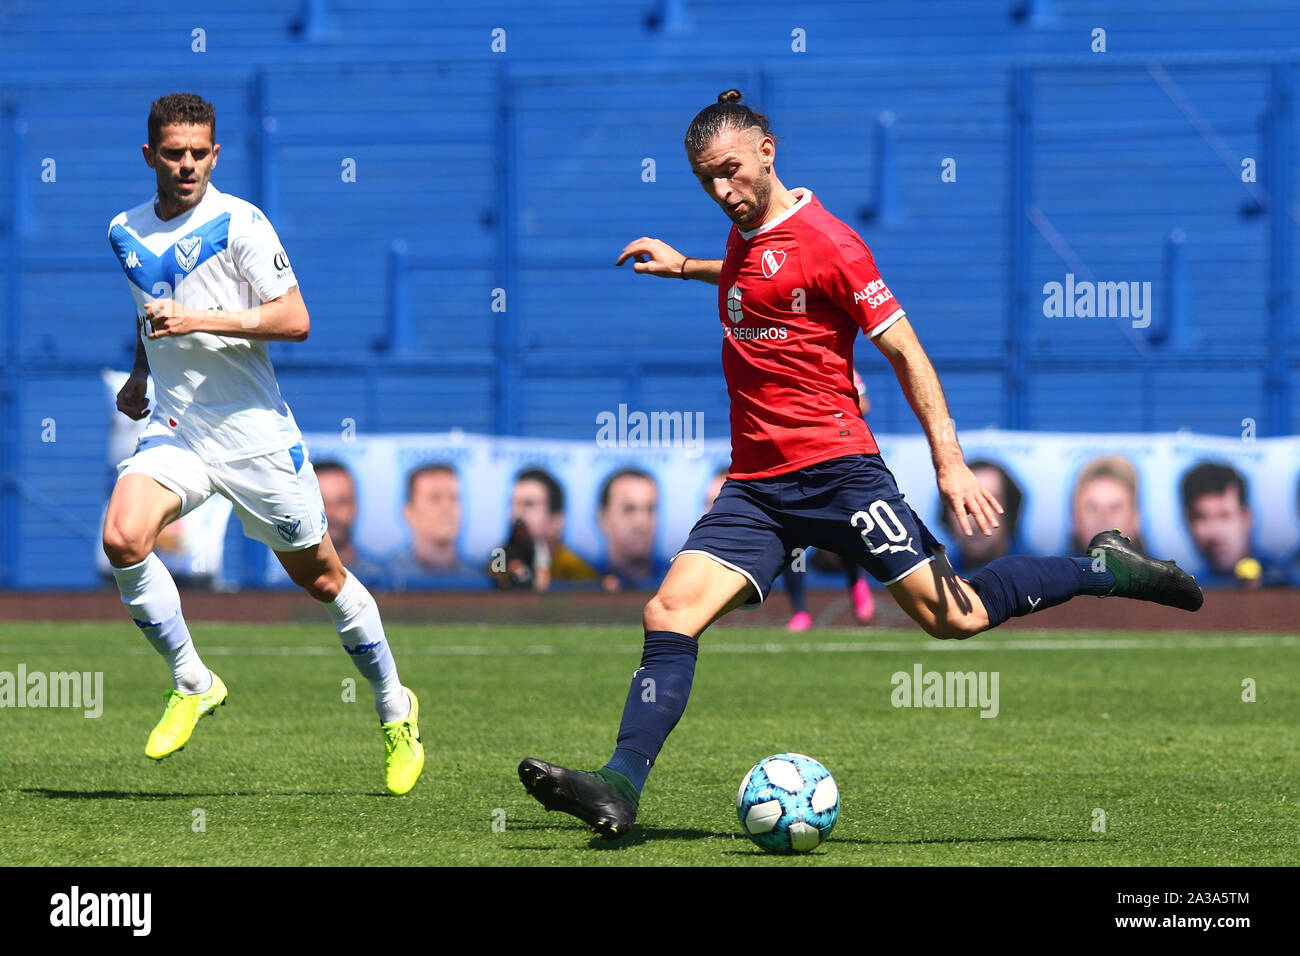 BUENOS AIRES, 06.10.2019: Gaston Silva during the match between Velez Sarsfield and Independiente at José Amalfitani Stadium in Buenos Aires, Argentin Stock Photo